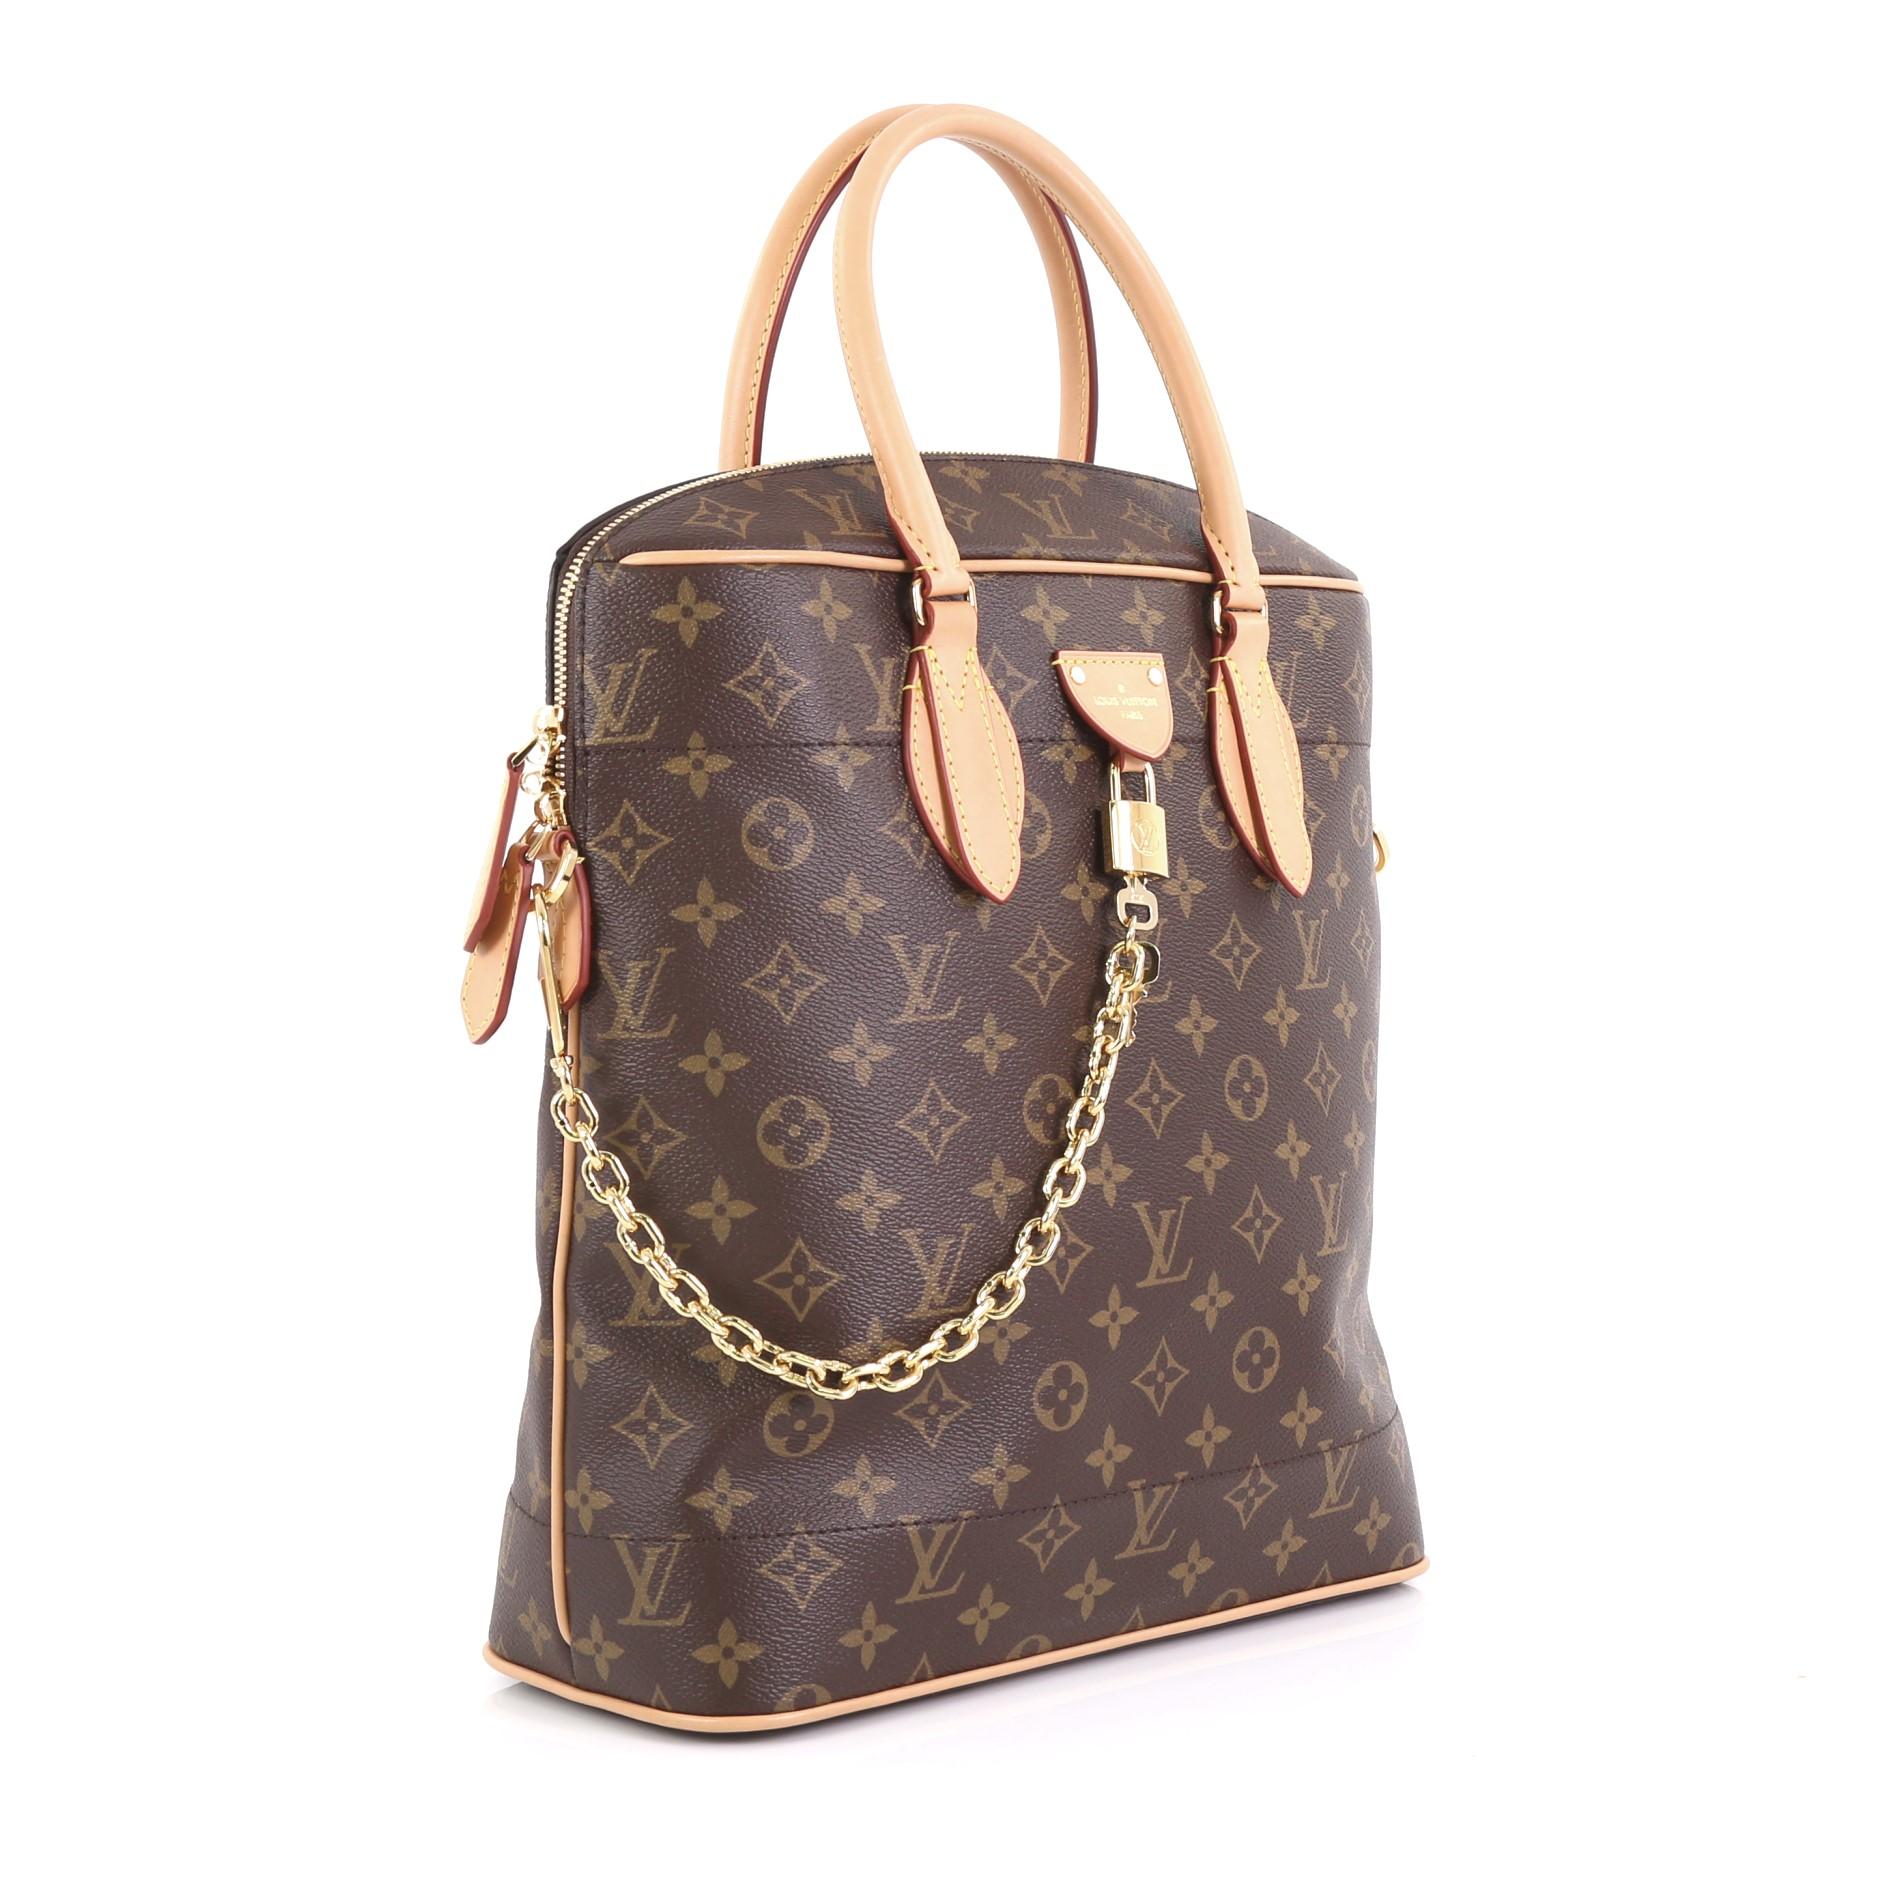 This Louis Vuitton Carry All Handbag Monogram Canvas MM, crafted in brown monogram coated canvas, features dual rolled leather handles, cowhide leather trim, chain links, and gold-tone hardware. Its zip closure opens to a brown microfiber interior